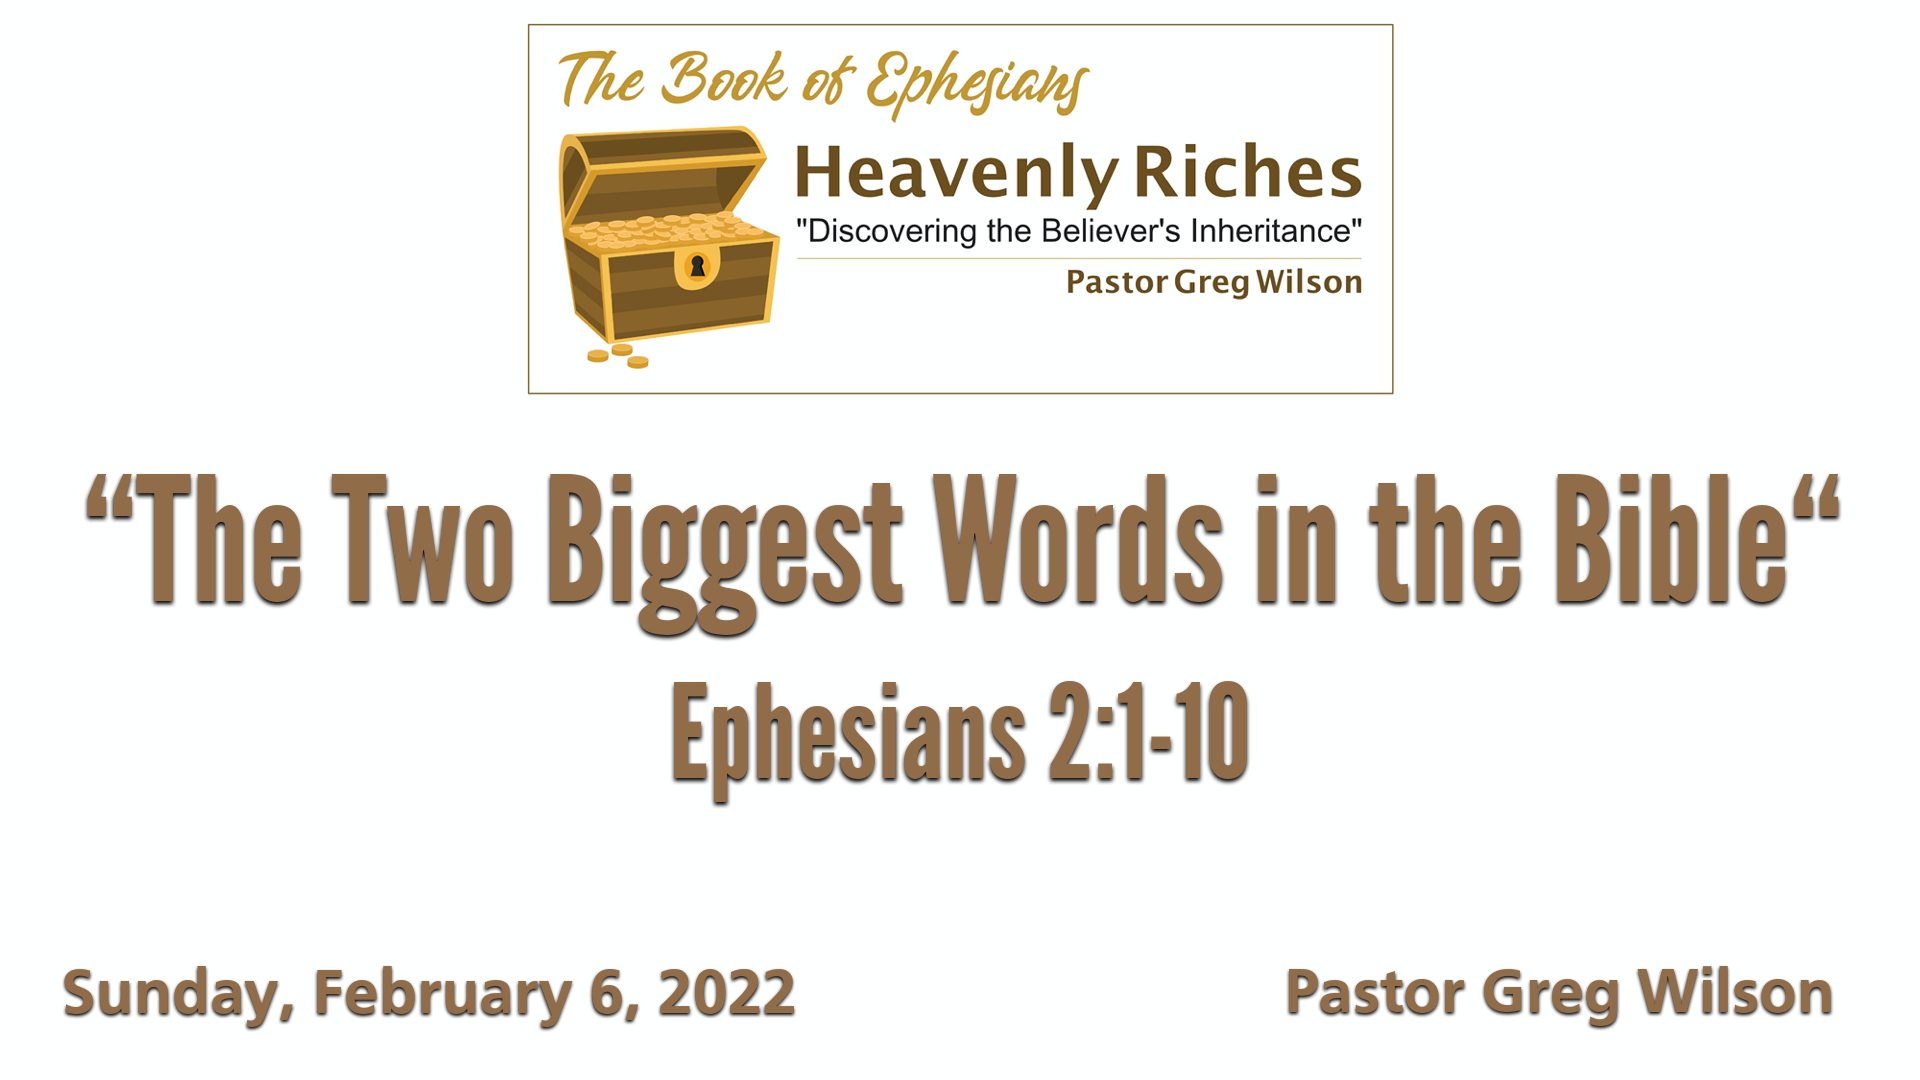 "The Two Biggest Words in the Bible"